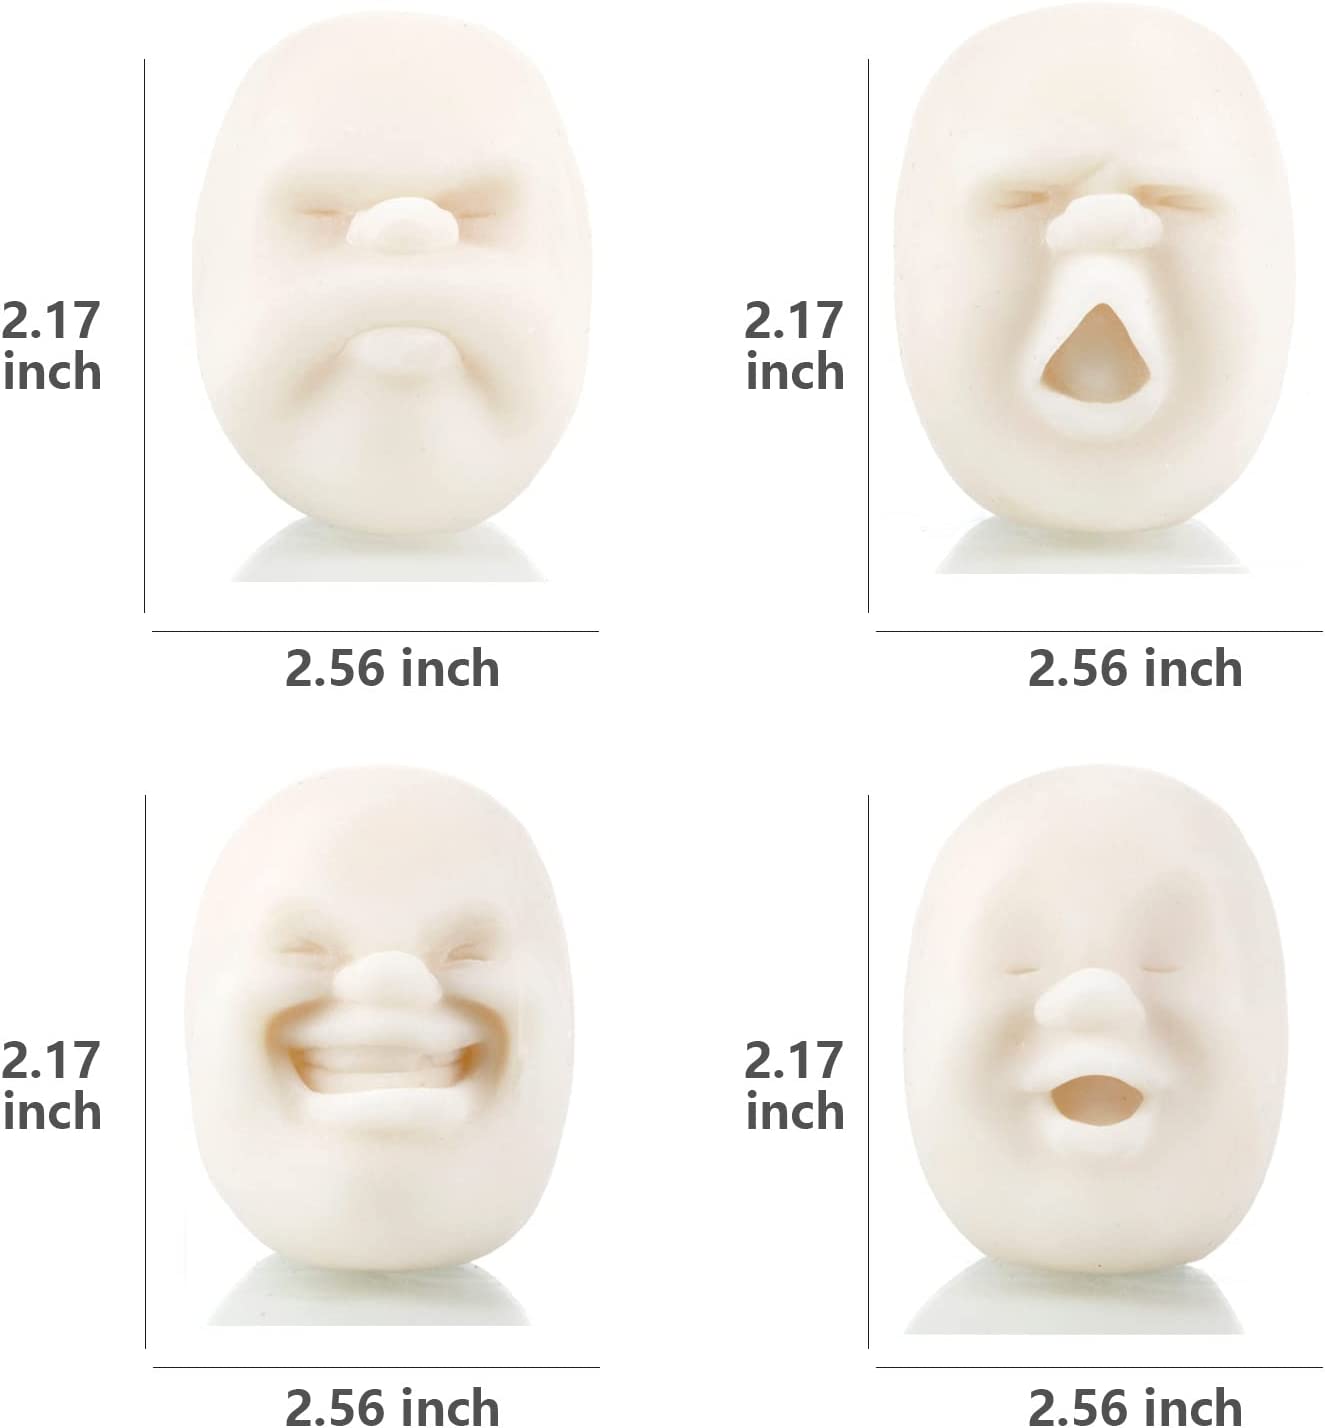 Size measurements for four human face stress balls. The measurements for all four are 2.17 inches tall and 2.56 inches wide.